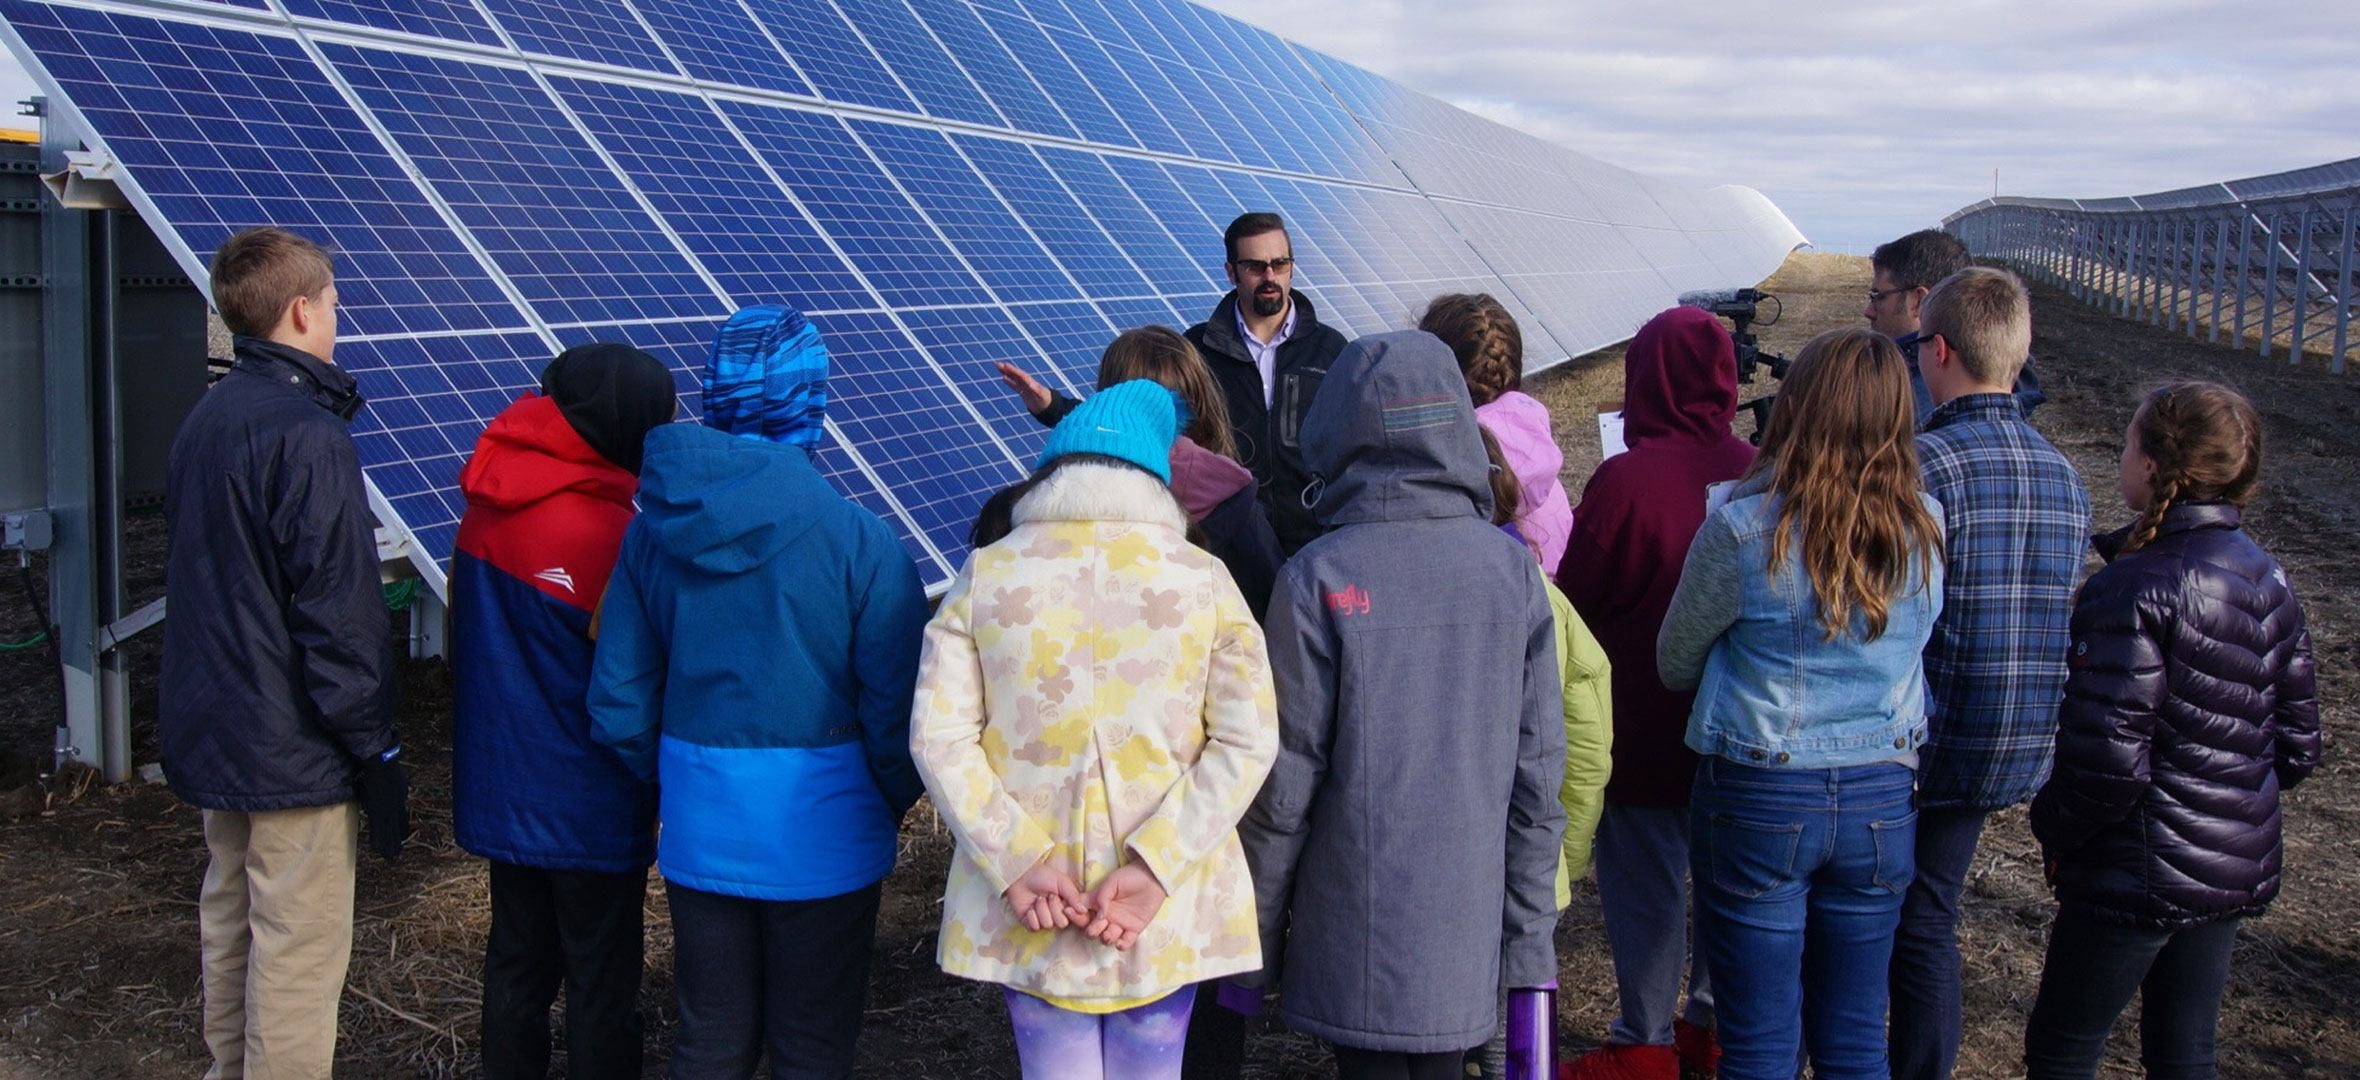 Students learn about solar panels